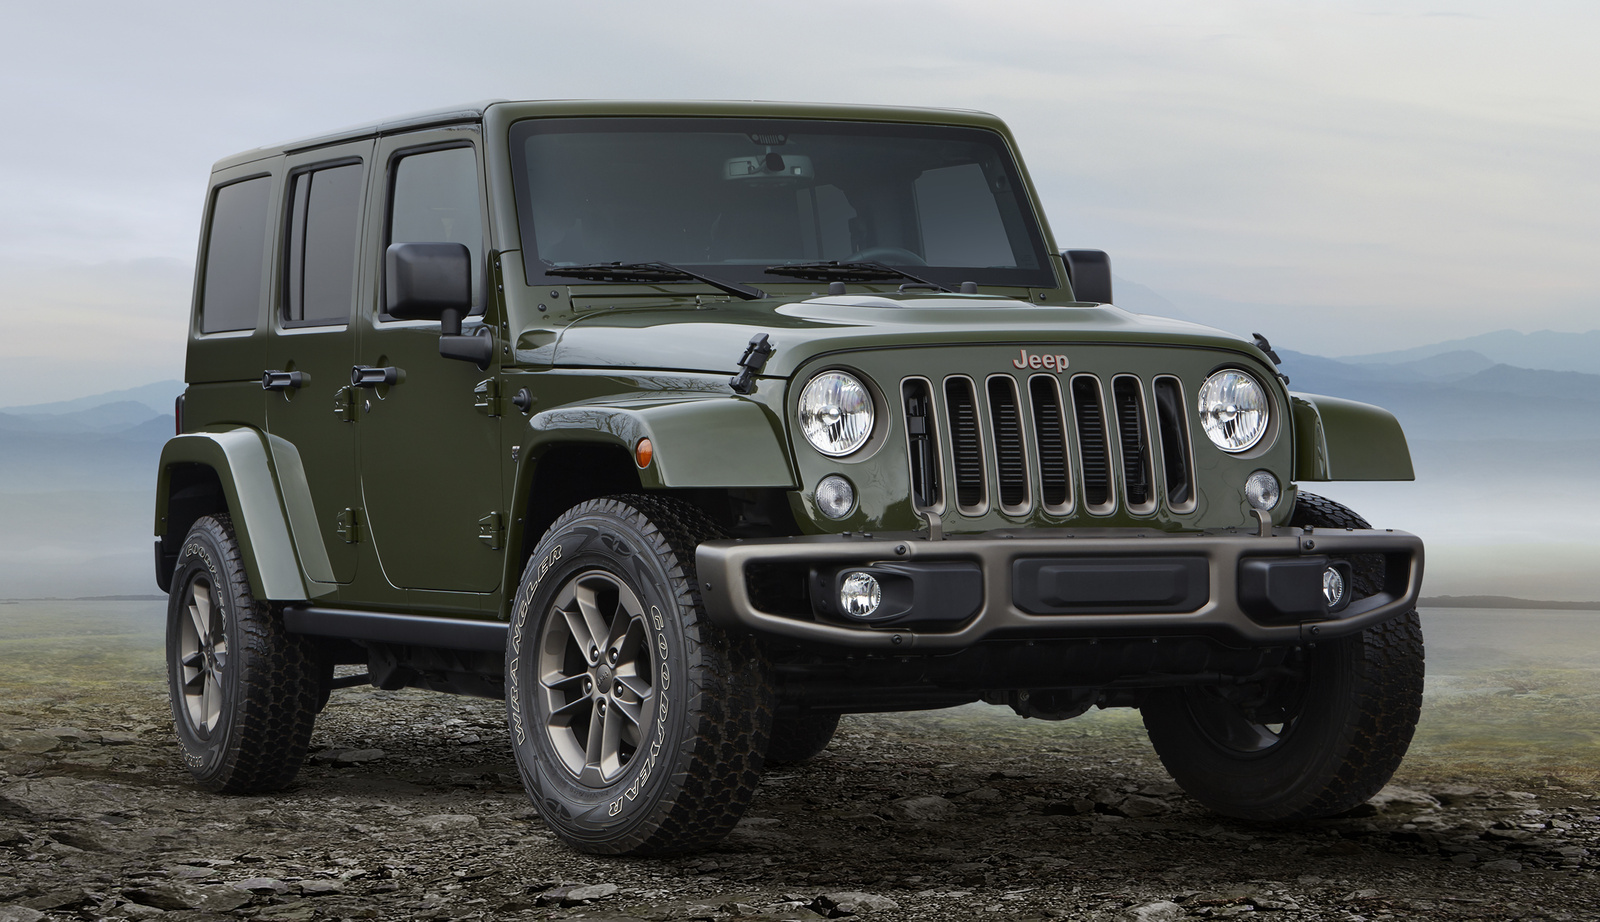 2016 Jeep Wrangler: Prices, Reviews & Pictures - CarGurus